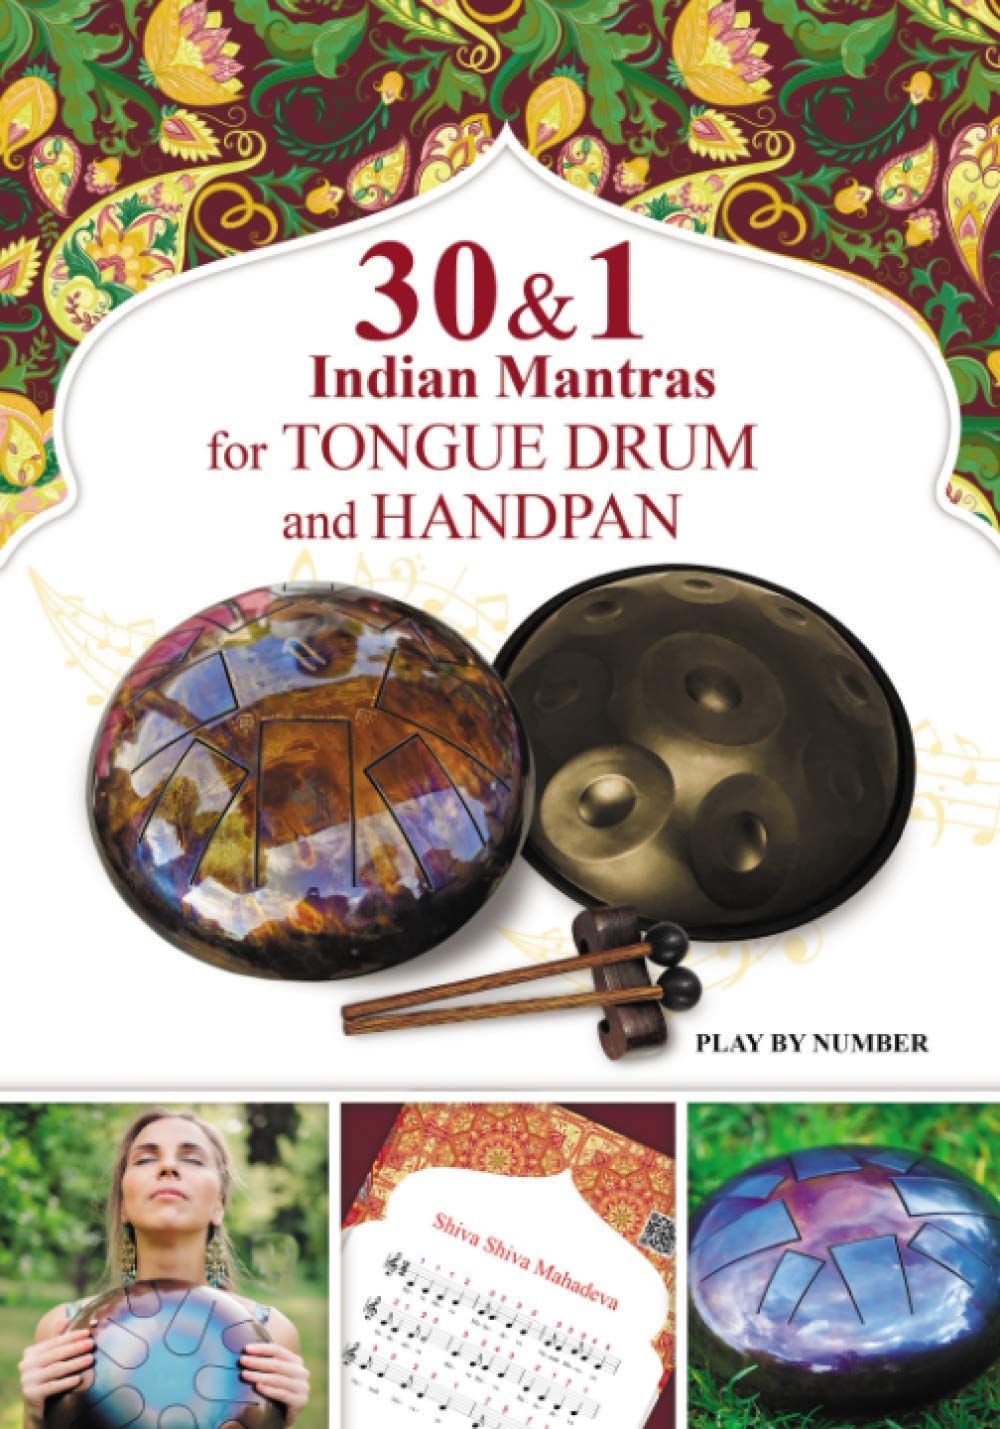 Book 30 and 1 Indian Mantras for Tongue Drum and Handpan Veda Gupta